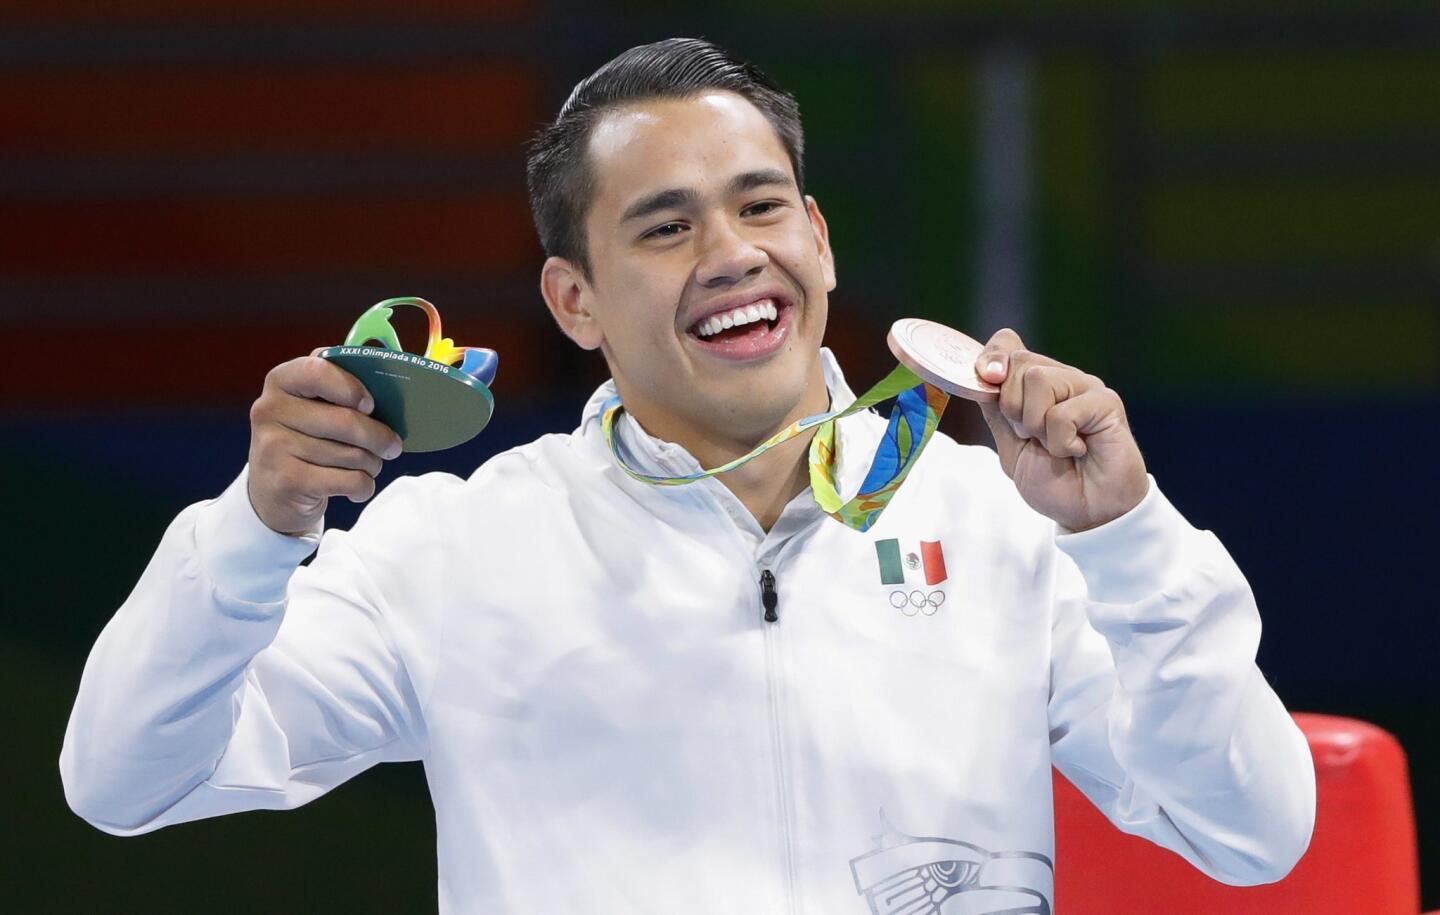 Misael Uziel Rodriguez of Mexico poses with his bronze medal on the podium of the men's Middle (75kg) competition of the Rio 2016 Olympic Games Boxing events.